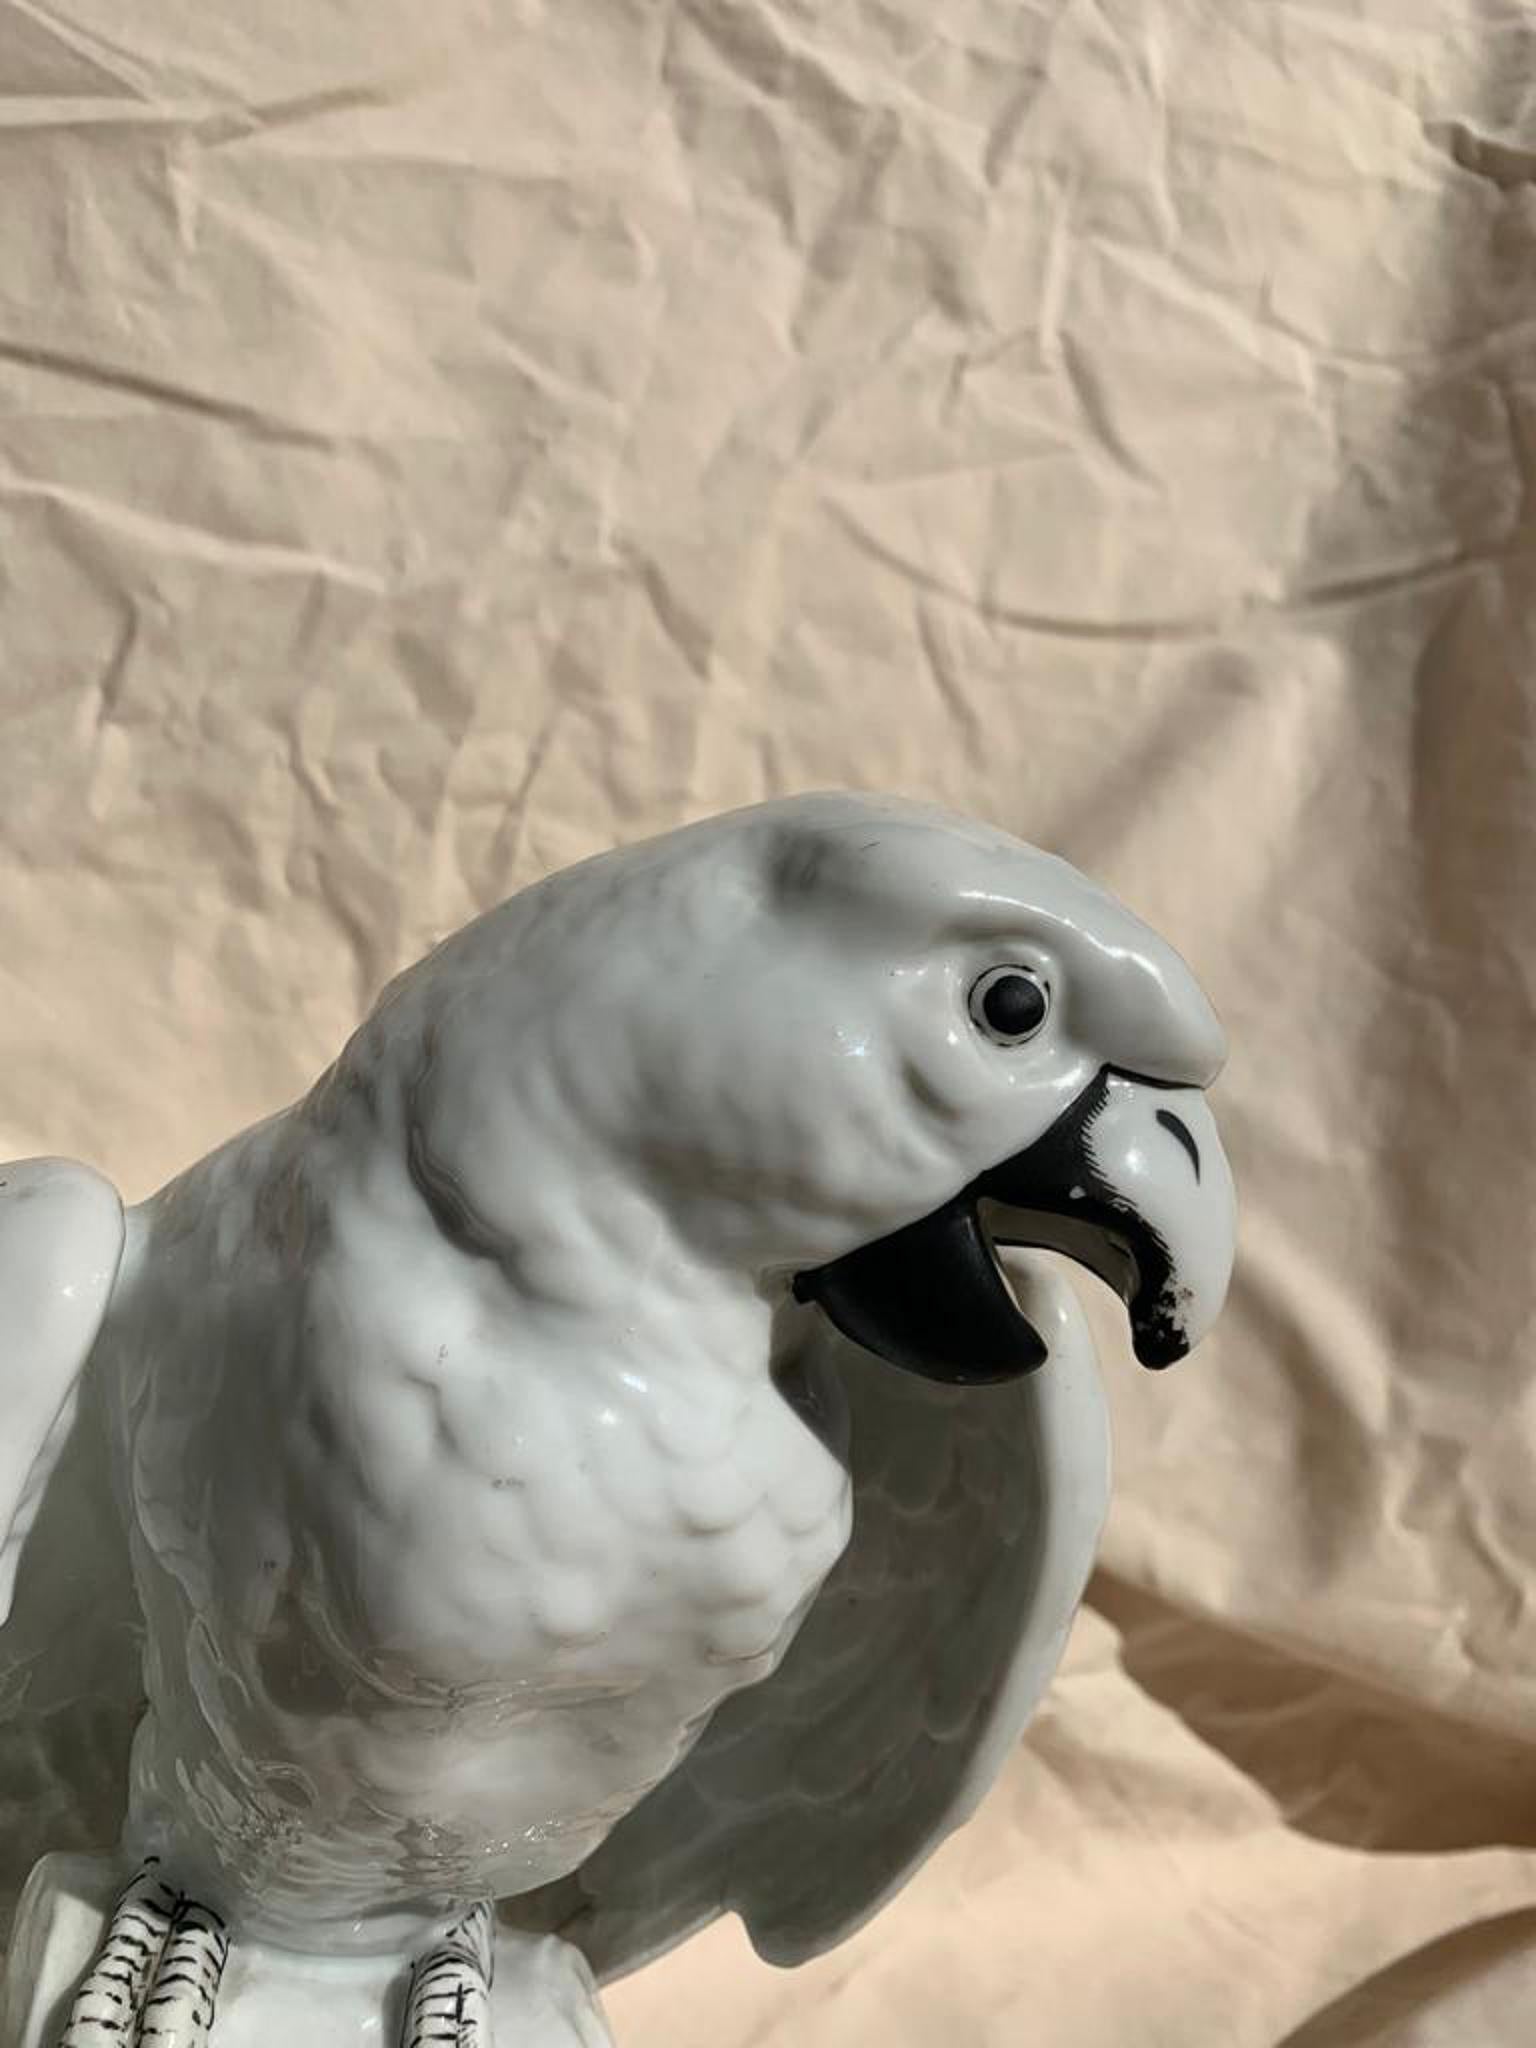 Porcelain Meissen cockatoo from 18th century.

The Meissen porcelain factory has gained a reputation for its production of exquisite, high-quality porcelain and its distinctive decorative figures. The craftsmanship and attention to detail in Meissen